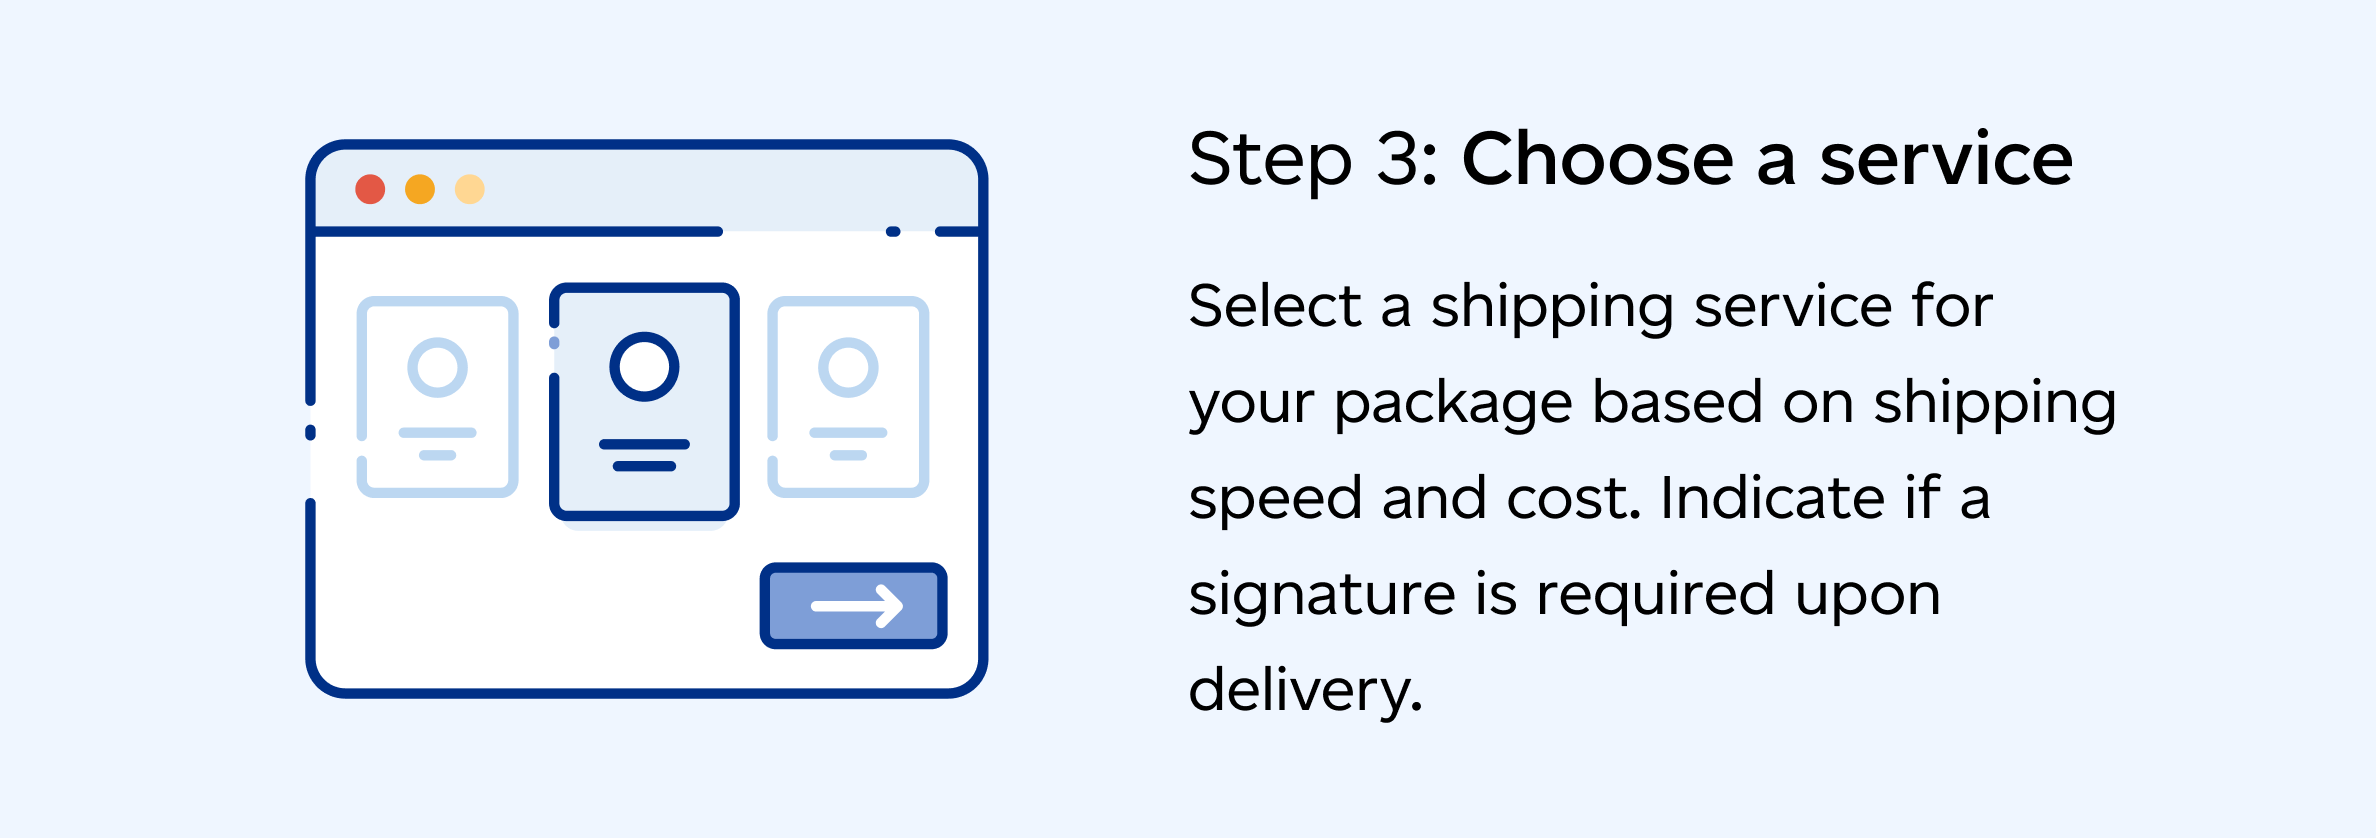 Step 3: Choose a shipping service for your package based on shipping speed and cost. Indicate if a signature is required upon delivery. 